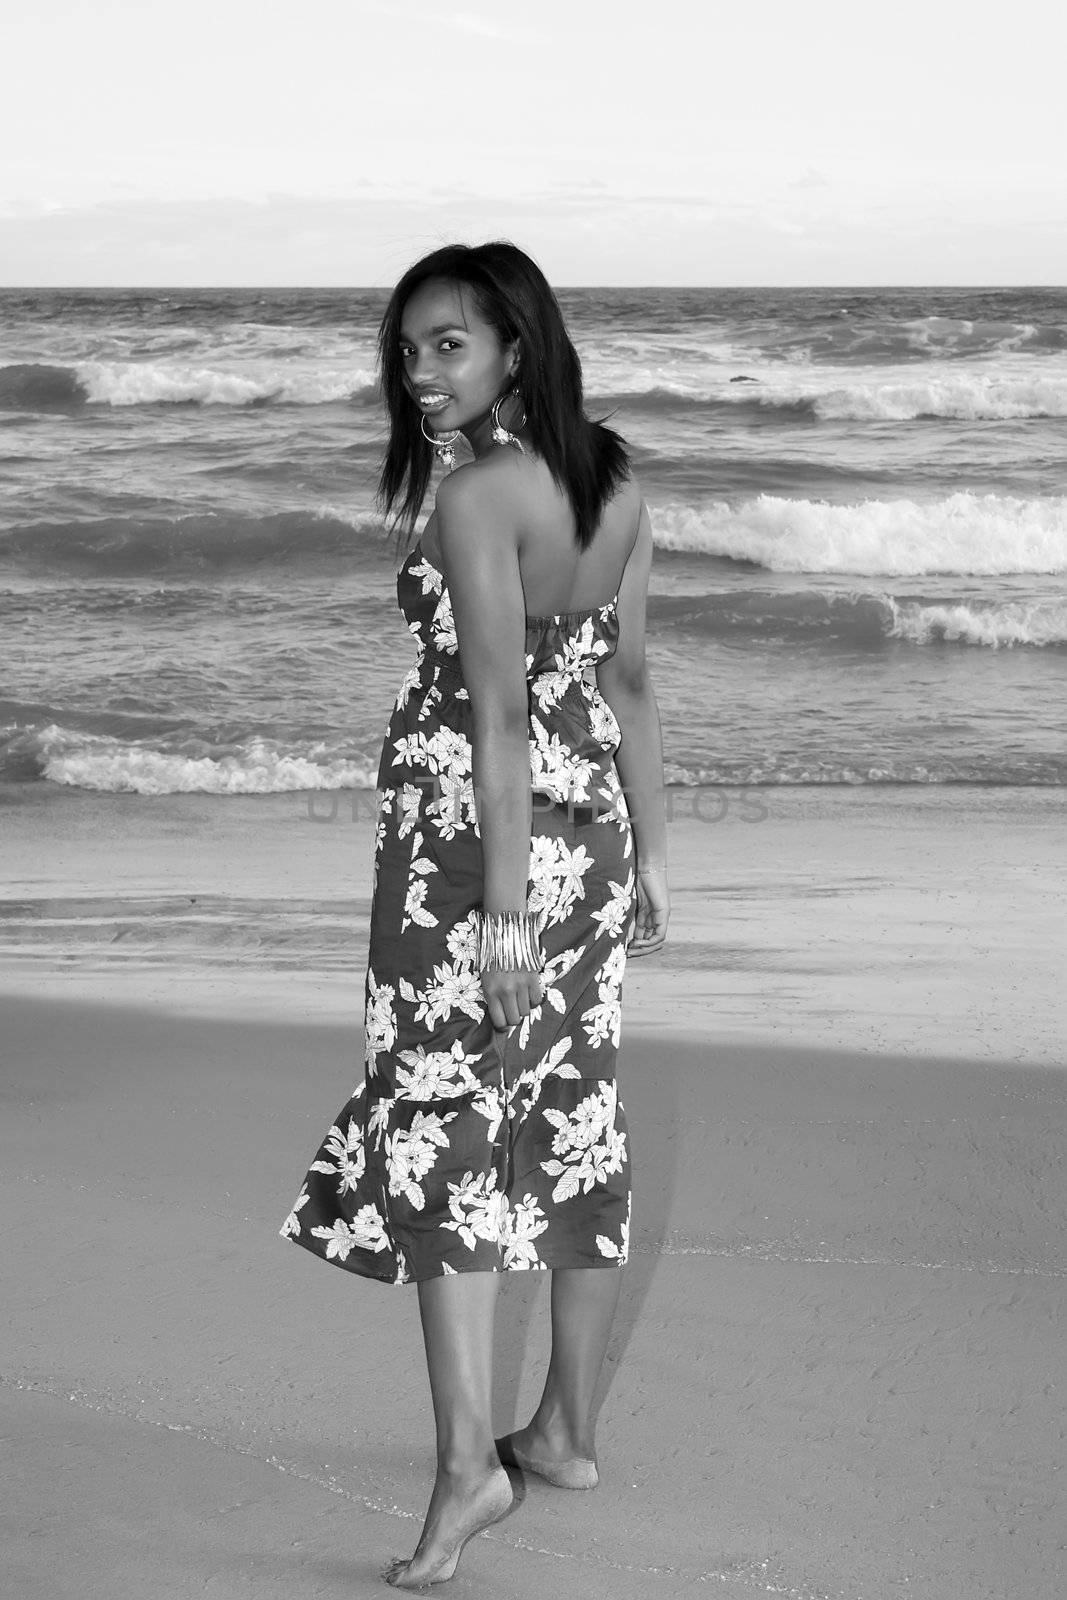 Black and White shot of an Ethnic model posing in a floral dress